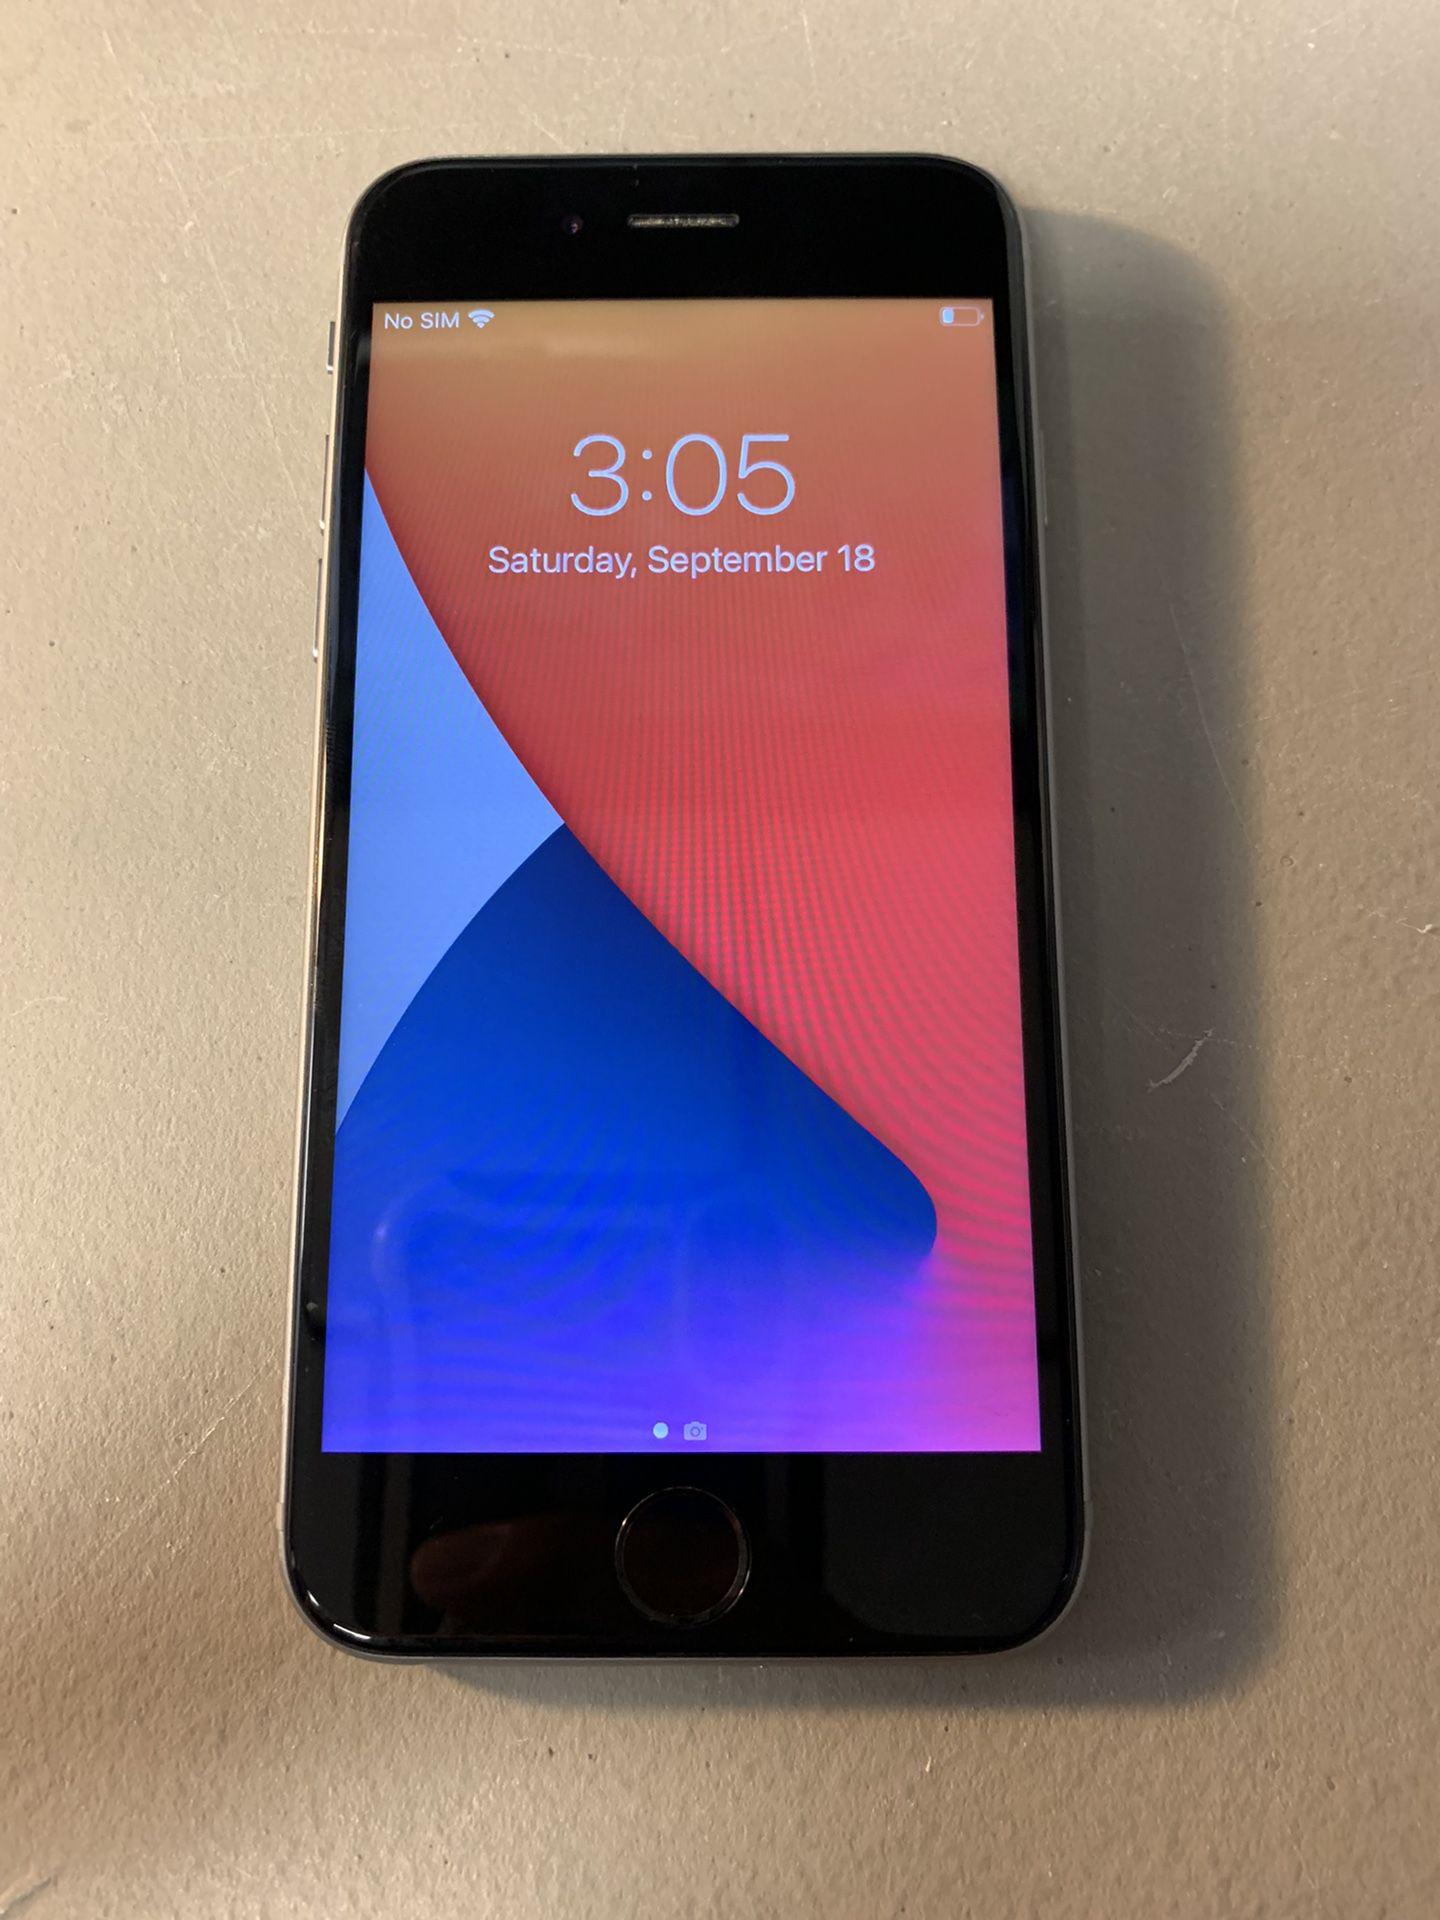 AT&T Apple iPhones 6S 64 GB space gray